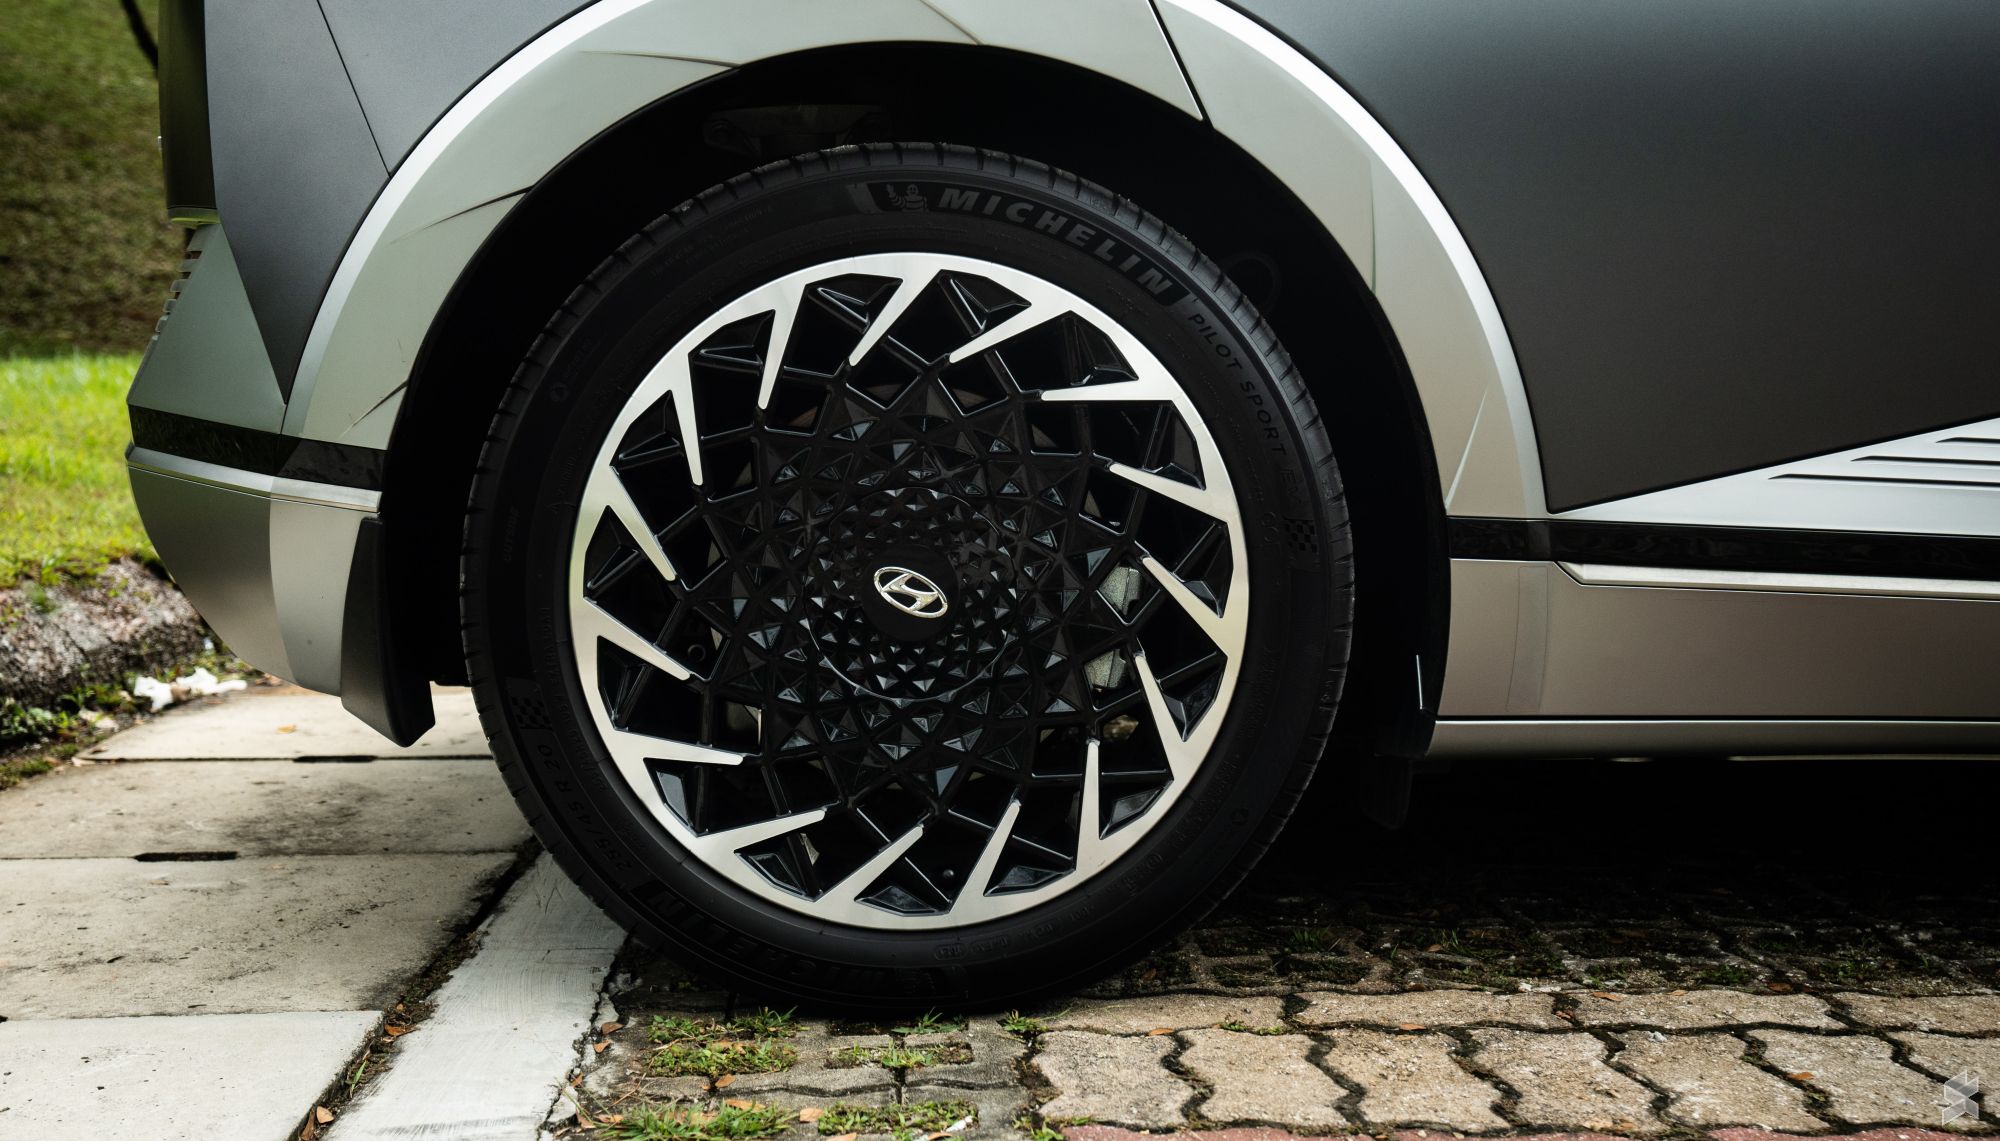 Do electric vehicles need EV-specific tyres?